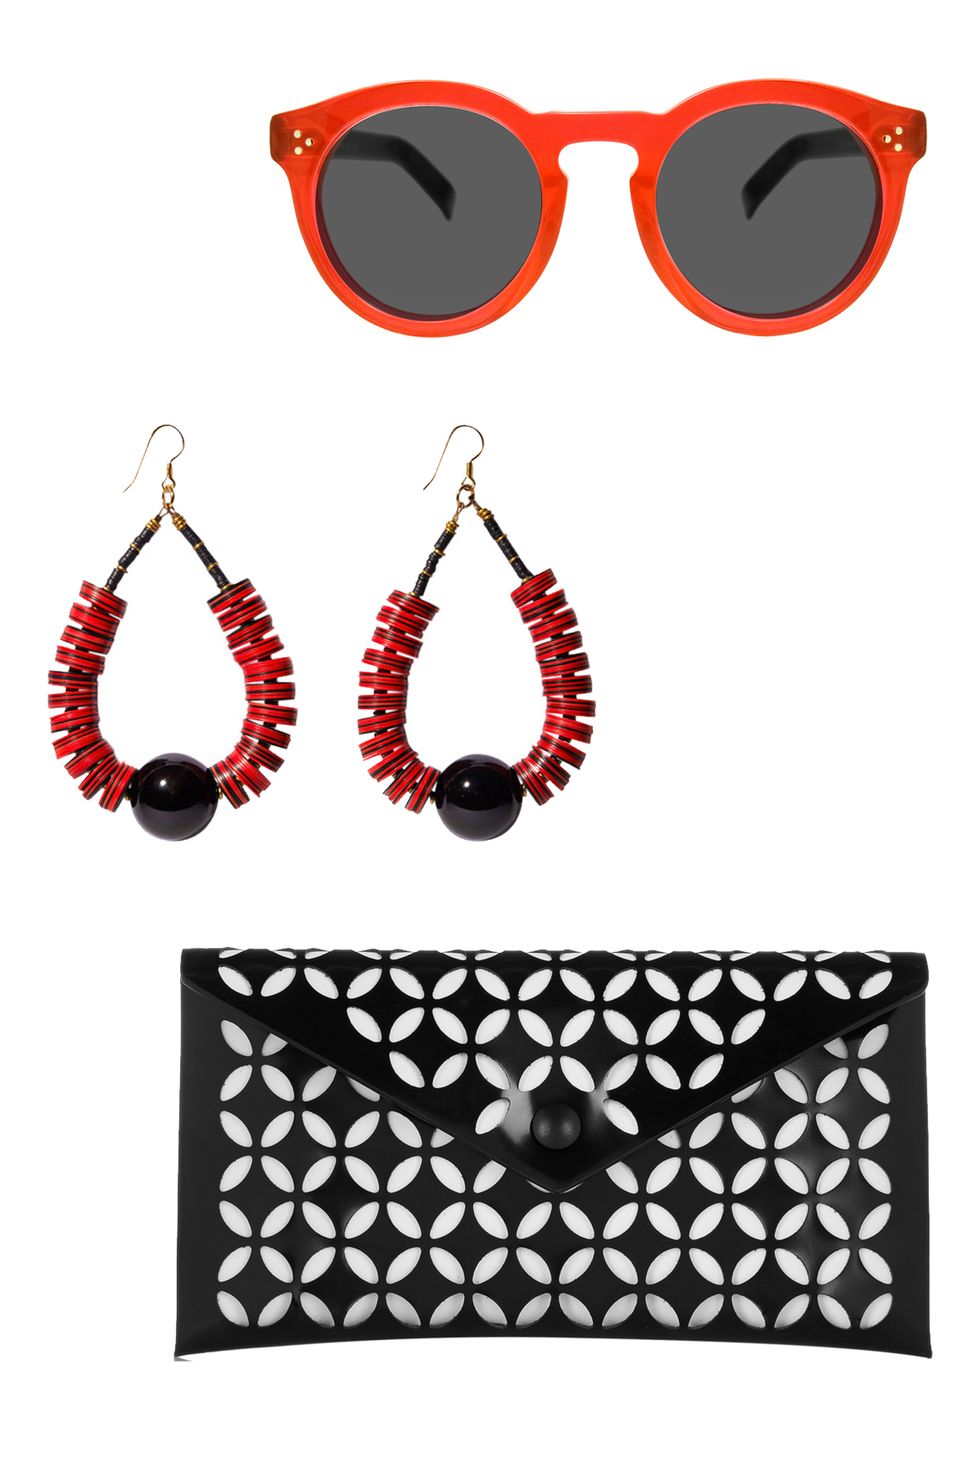 <p>The beauty of statement accessories? They're lightweight. Amplify your daytime denim with bright sunglasses and bold earrings. And leave your wallet at home—a graphic pouch fits all the essentials (credit cards, ID, smartphone, lipstick, room key...) and doubles as your nighttime clutch. <em>Alaïa Laser-Cut Leather Pouch, $800, <a href="https://www.net-a-porter.com/us/en/product/545098/alaia/laser-cut-leather-pouch" target="_blank">netaporter.com</a>; </em><em><em>Derek Lam The High Priestess Earring, $495, <a href="https://shop.harpersbazaar.com/designers/d/derek-lam/walt-cassidy-studio-for-derek-lam-8029.html#" target="_blank">shopBAZAAR.com</a>;</em><em> </em></em><em><em>Illesteva Leonard II Sunglasses, $290, <a href="https://shop.harpersbazaar.com/designers/i/illesteva/leonard-ii-redblack-6369.html" target="_blank"><strong>shopBAZAAR.com</strong></a></em><em>.</em></em></p>